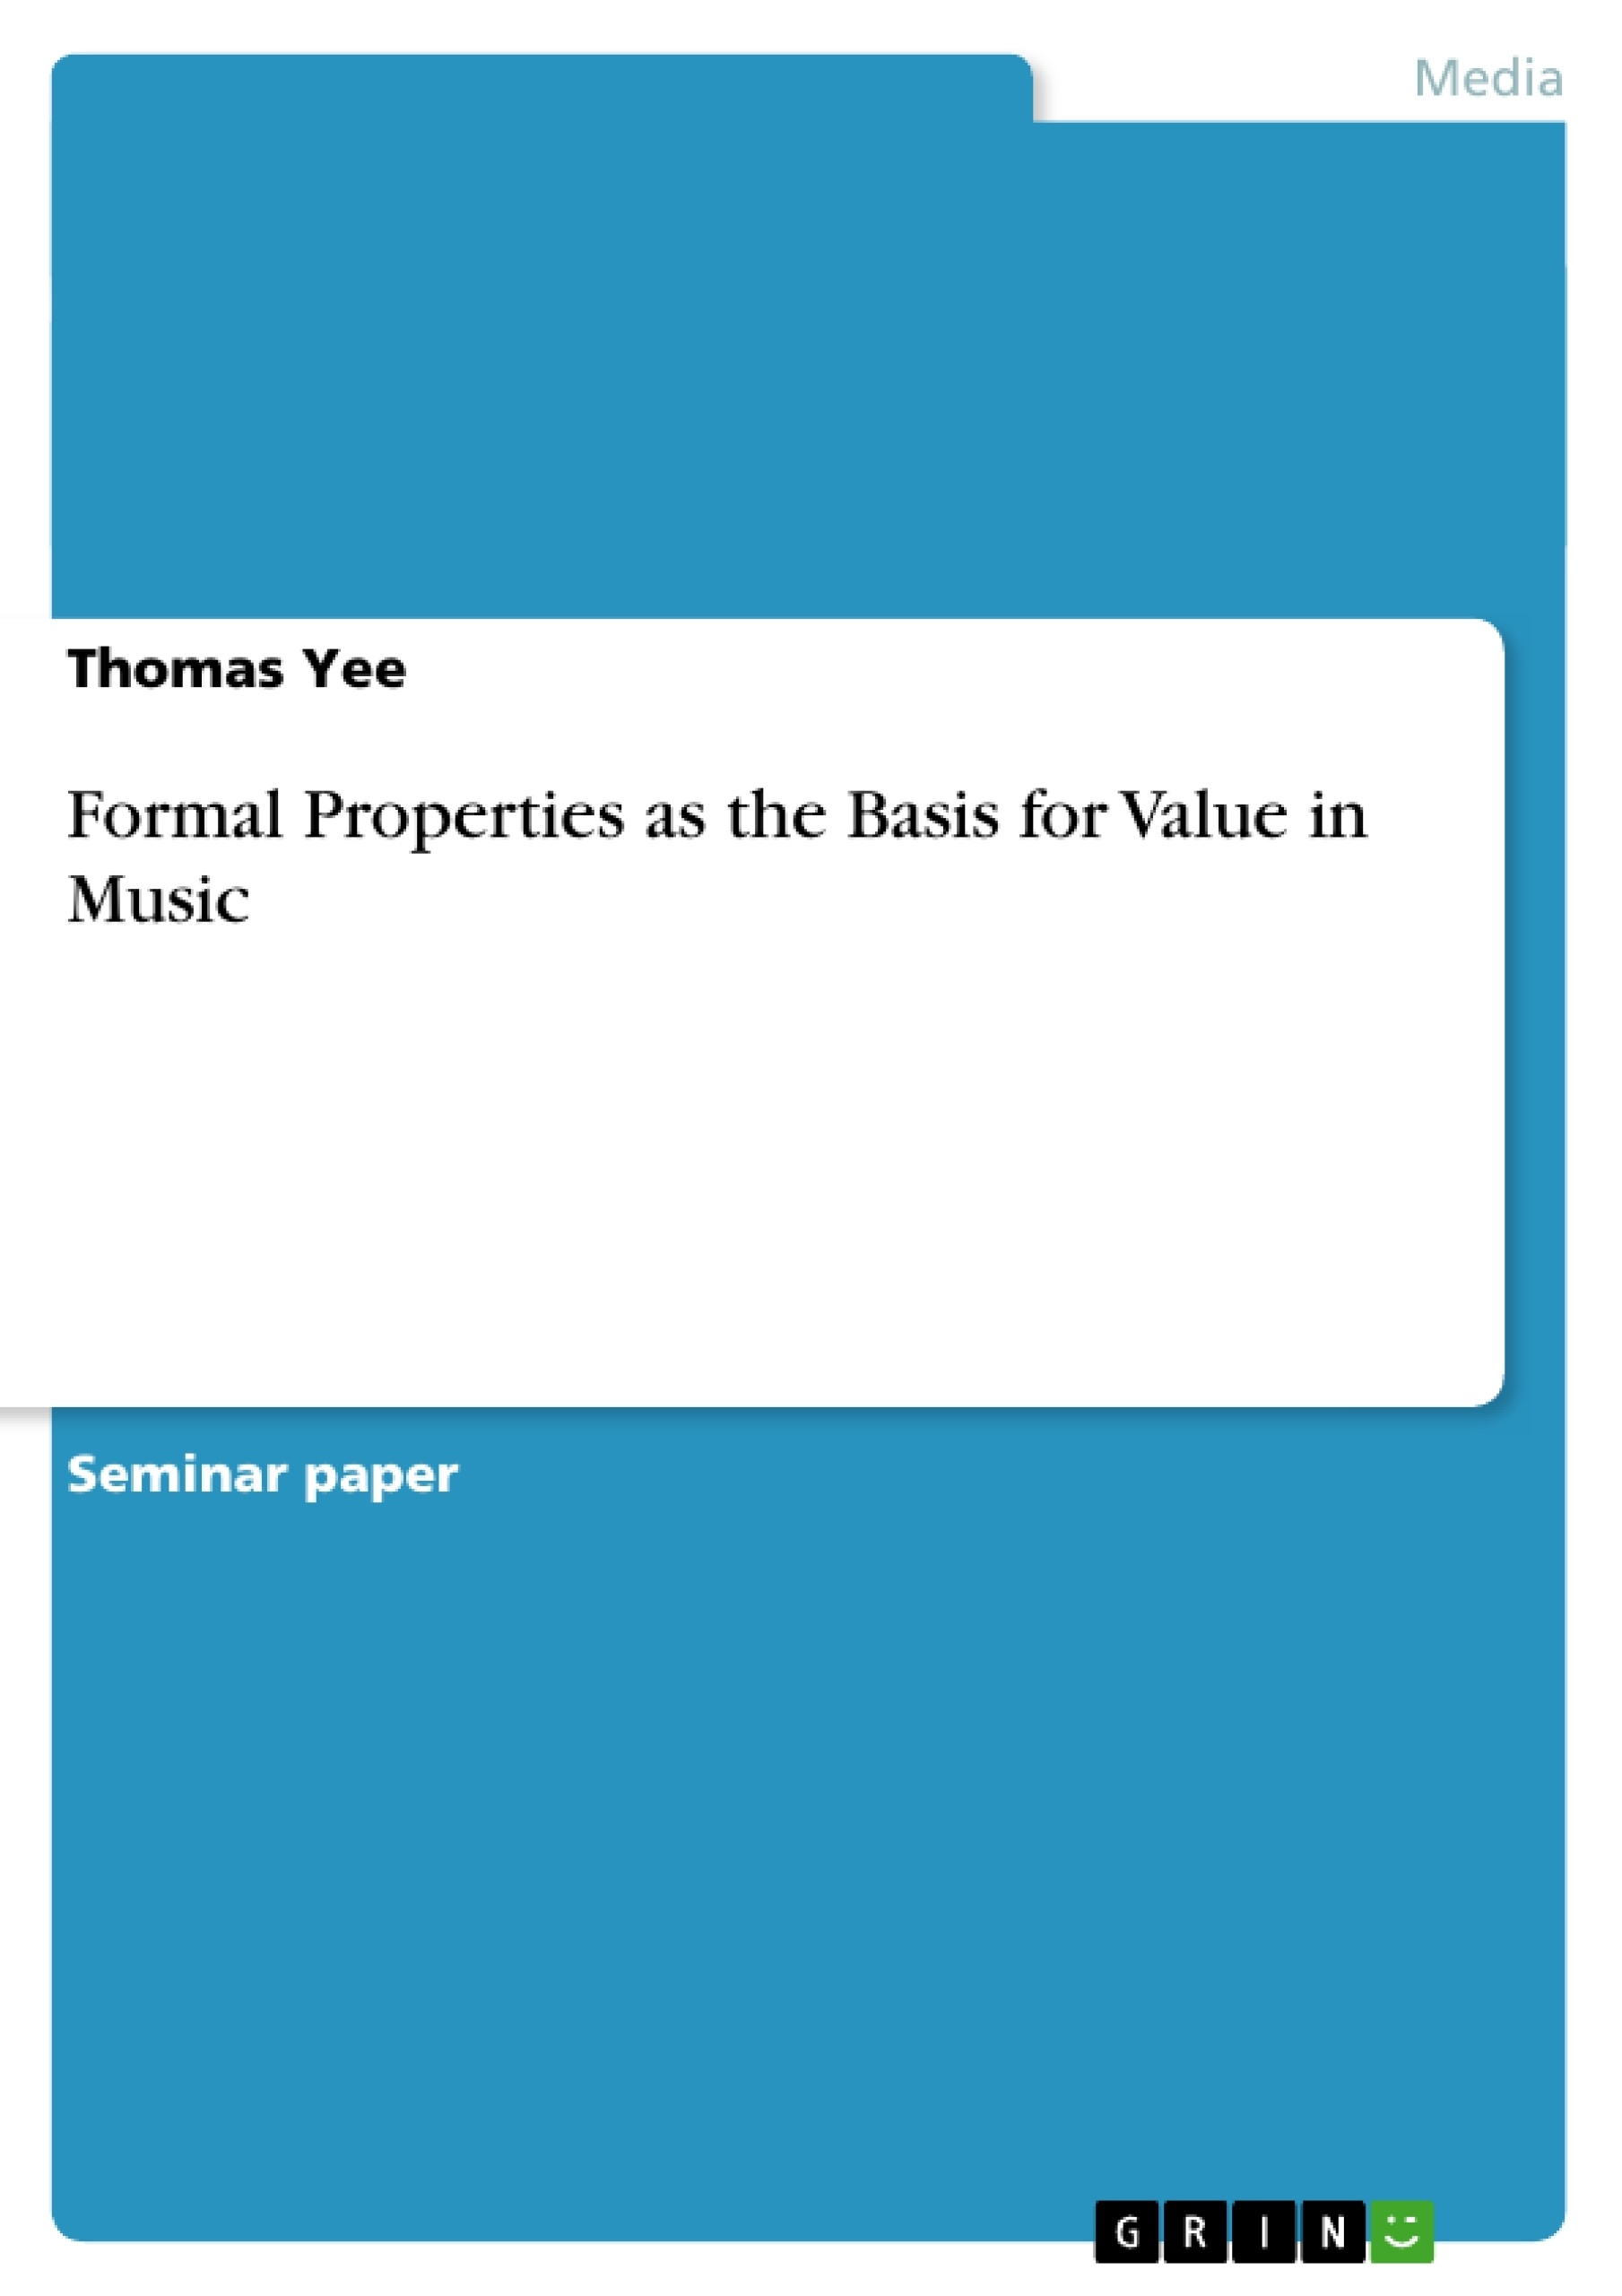 Title: Formal Properties as the Basis for Value in Music